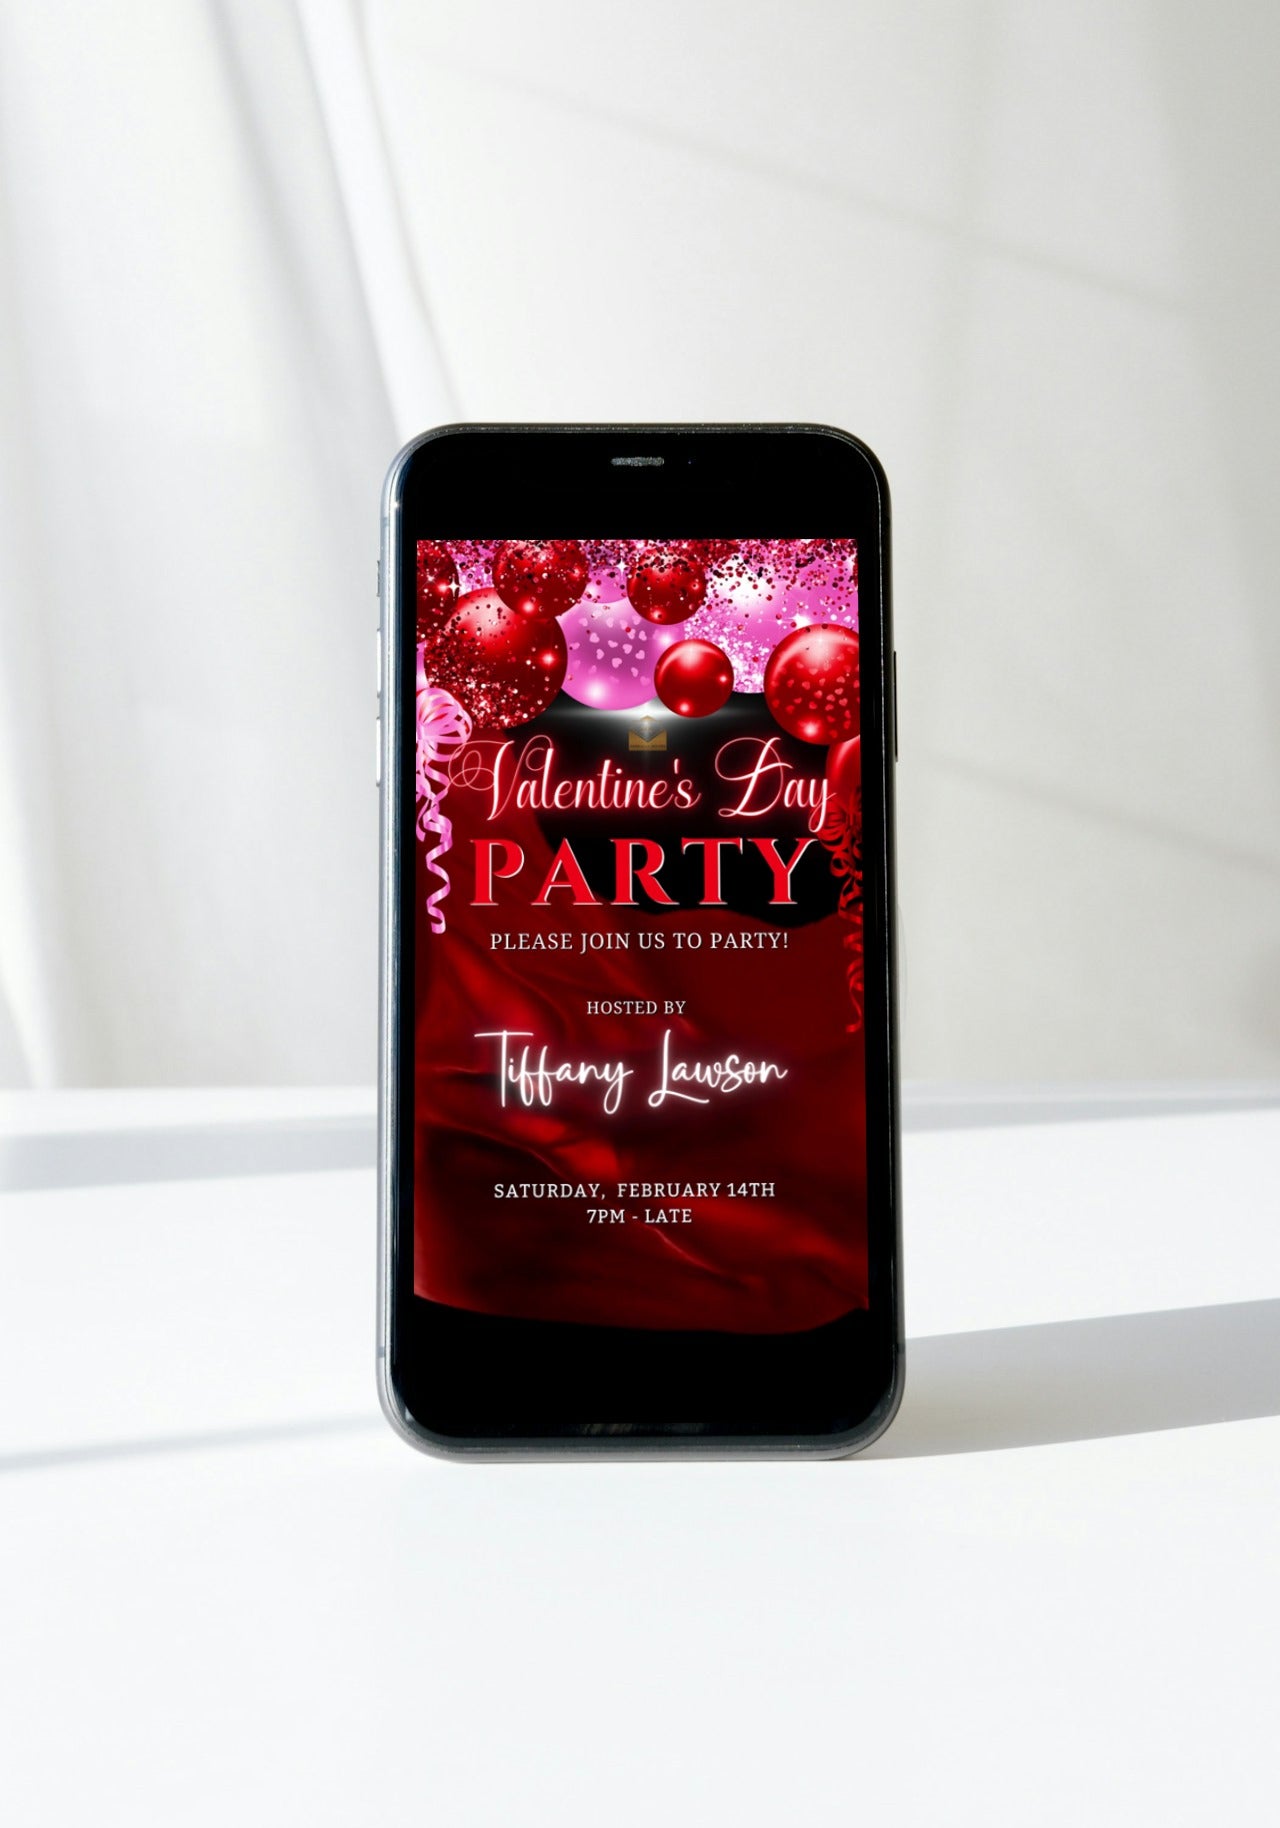 Editable Digital Pink Red Silk Neon Balloons Valentines Party Invite displayed on a smartphone screen.